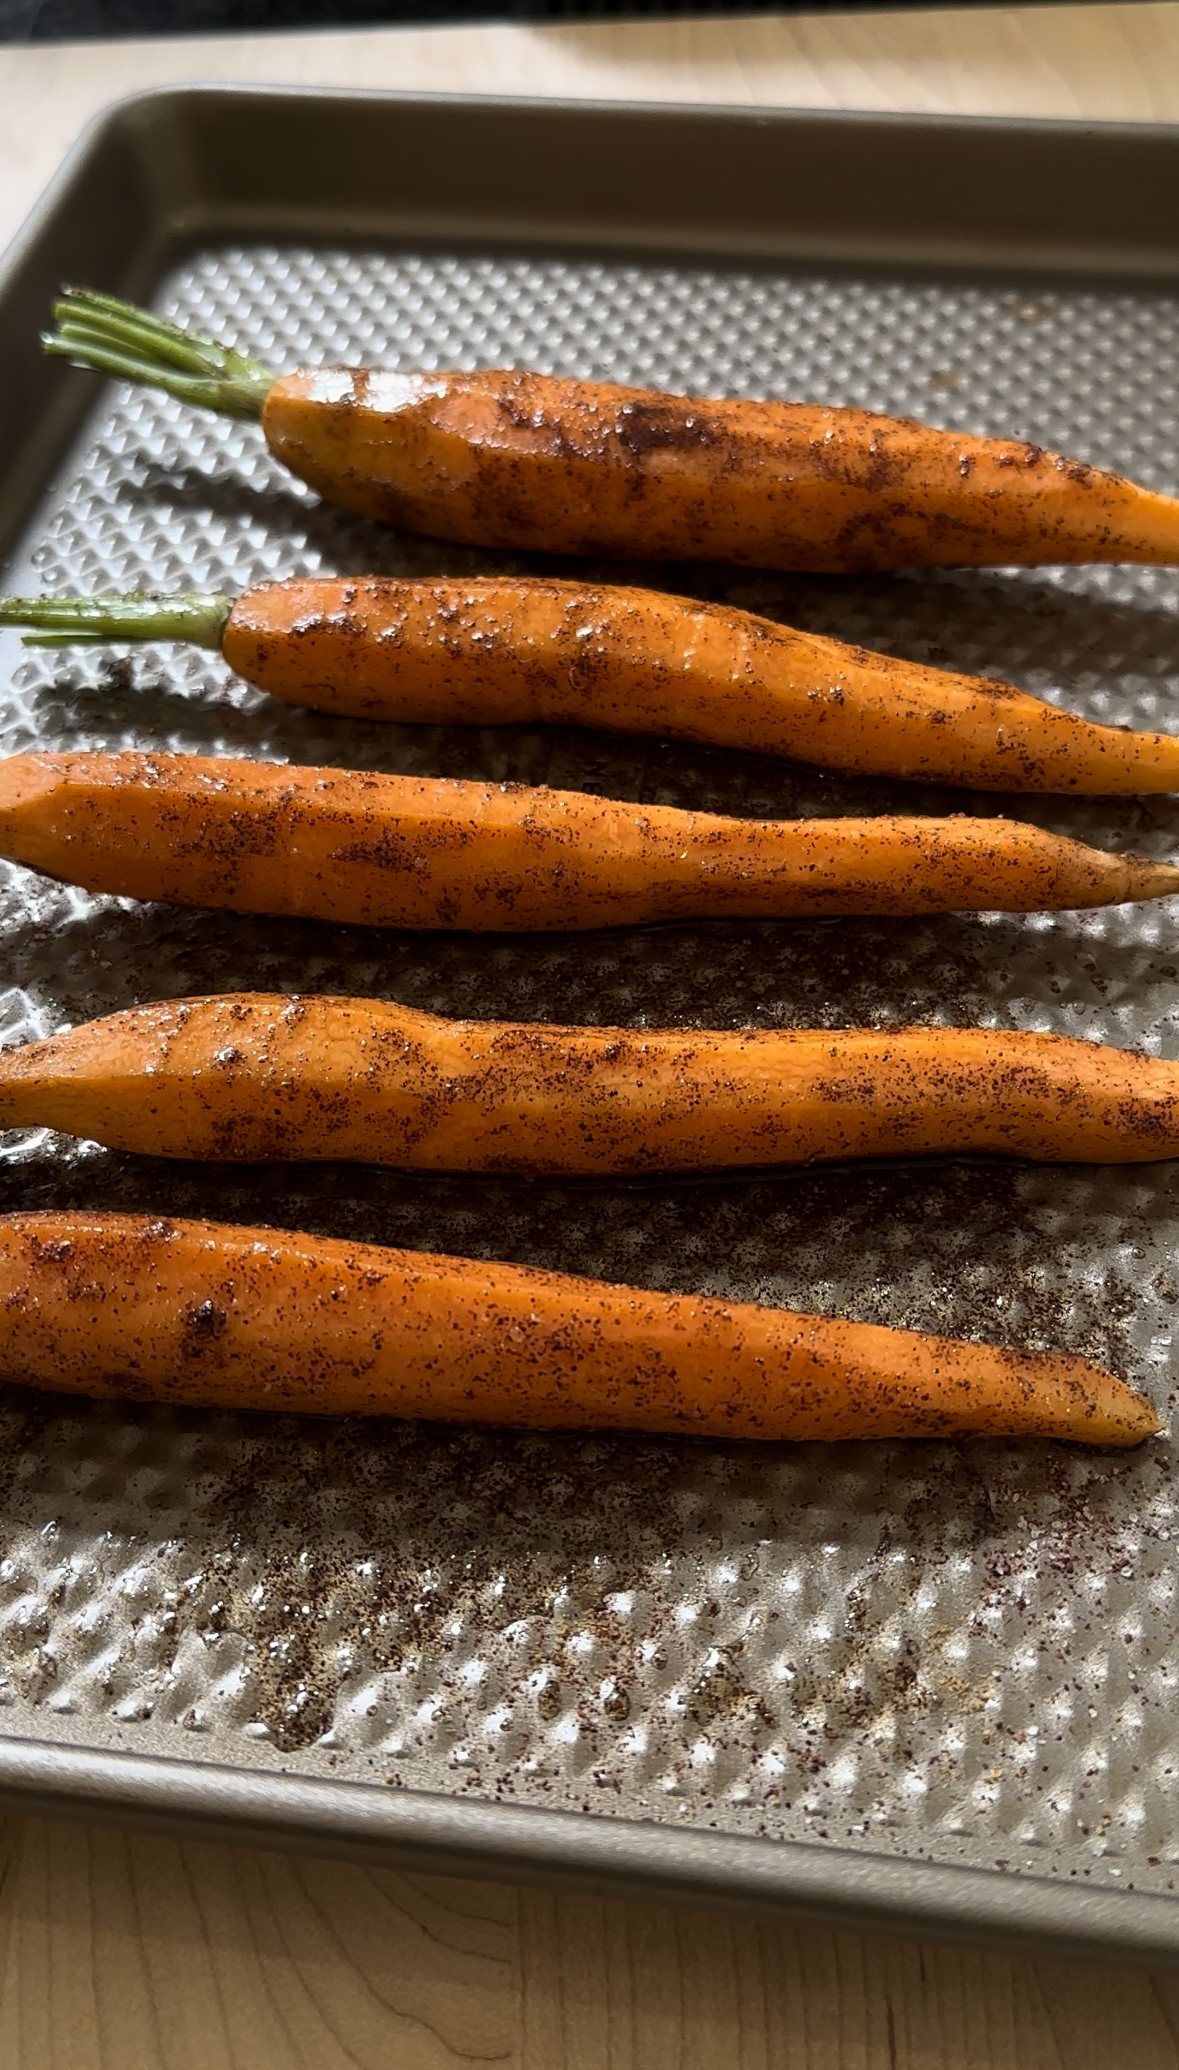 Sumac Roasted Carrots with White Bean Carrot Top Dip